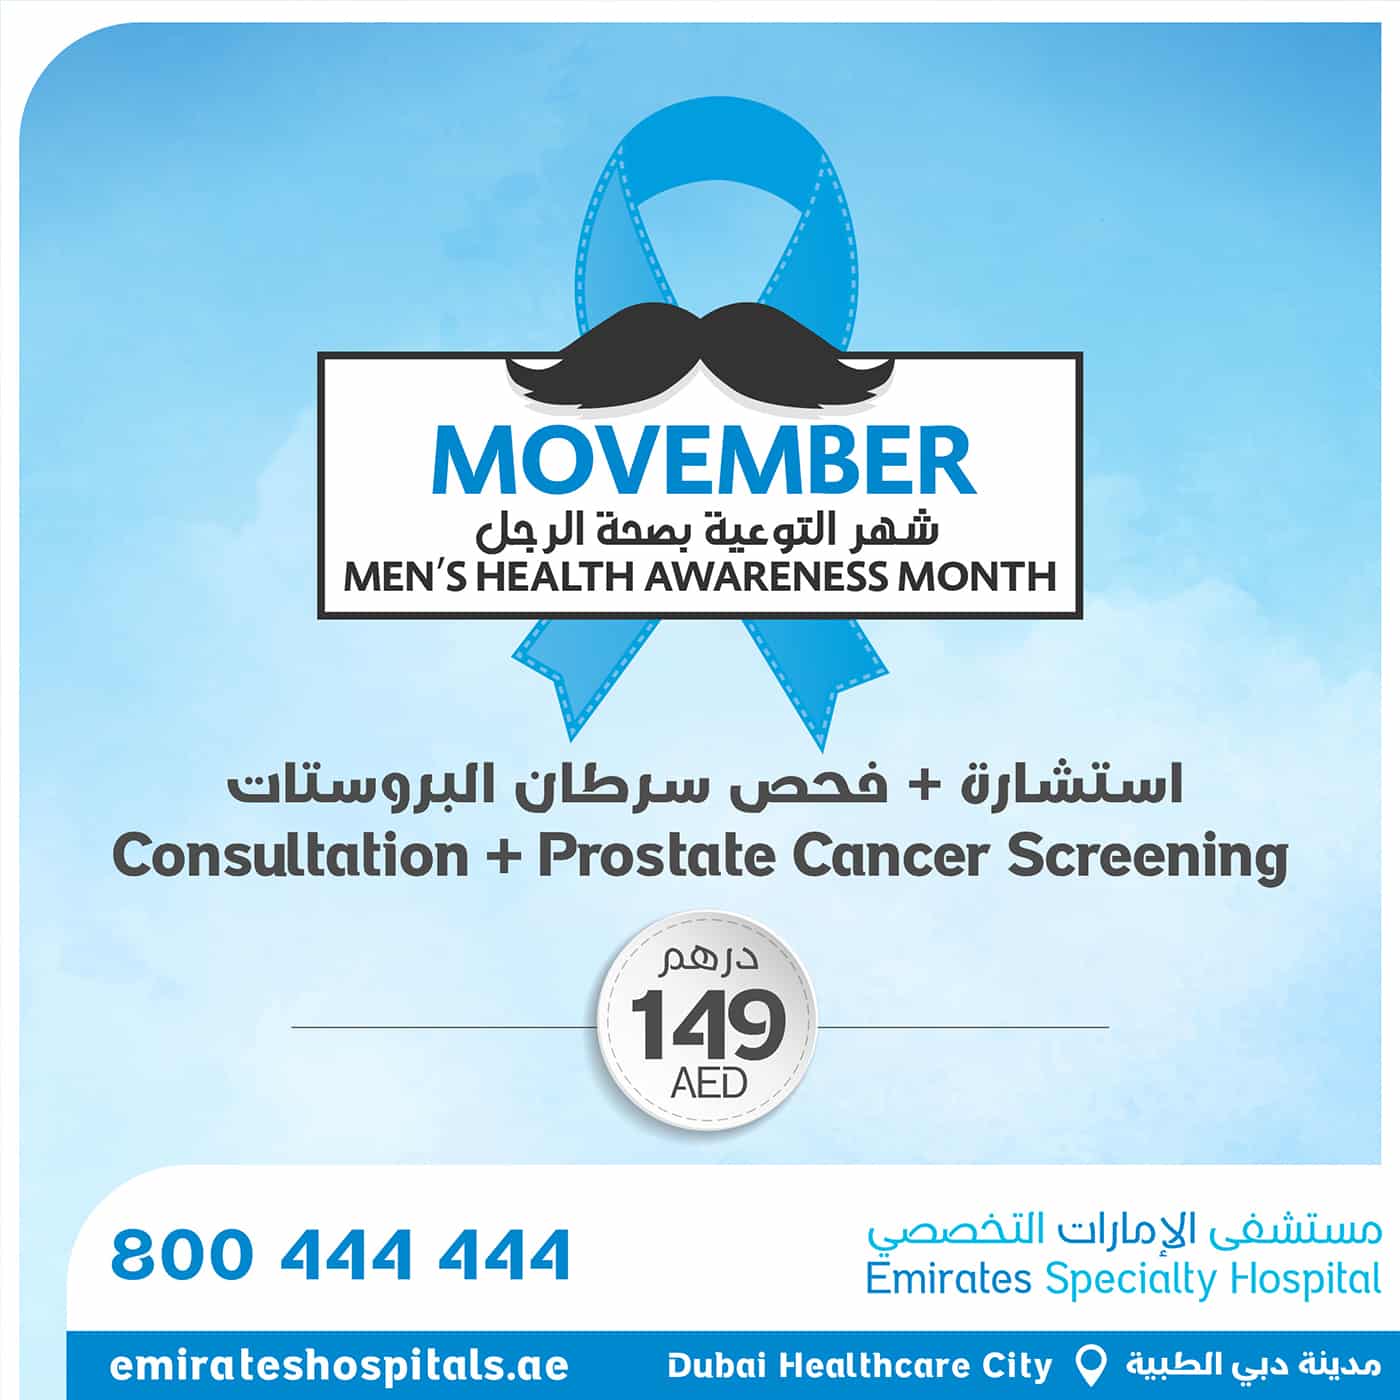 Special Offers on Men's Health Awareness Month , Emirates Specialty Hospital DHCC